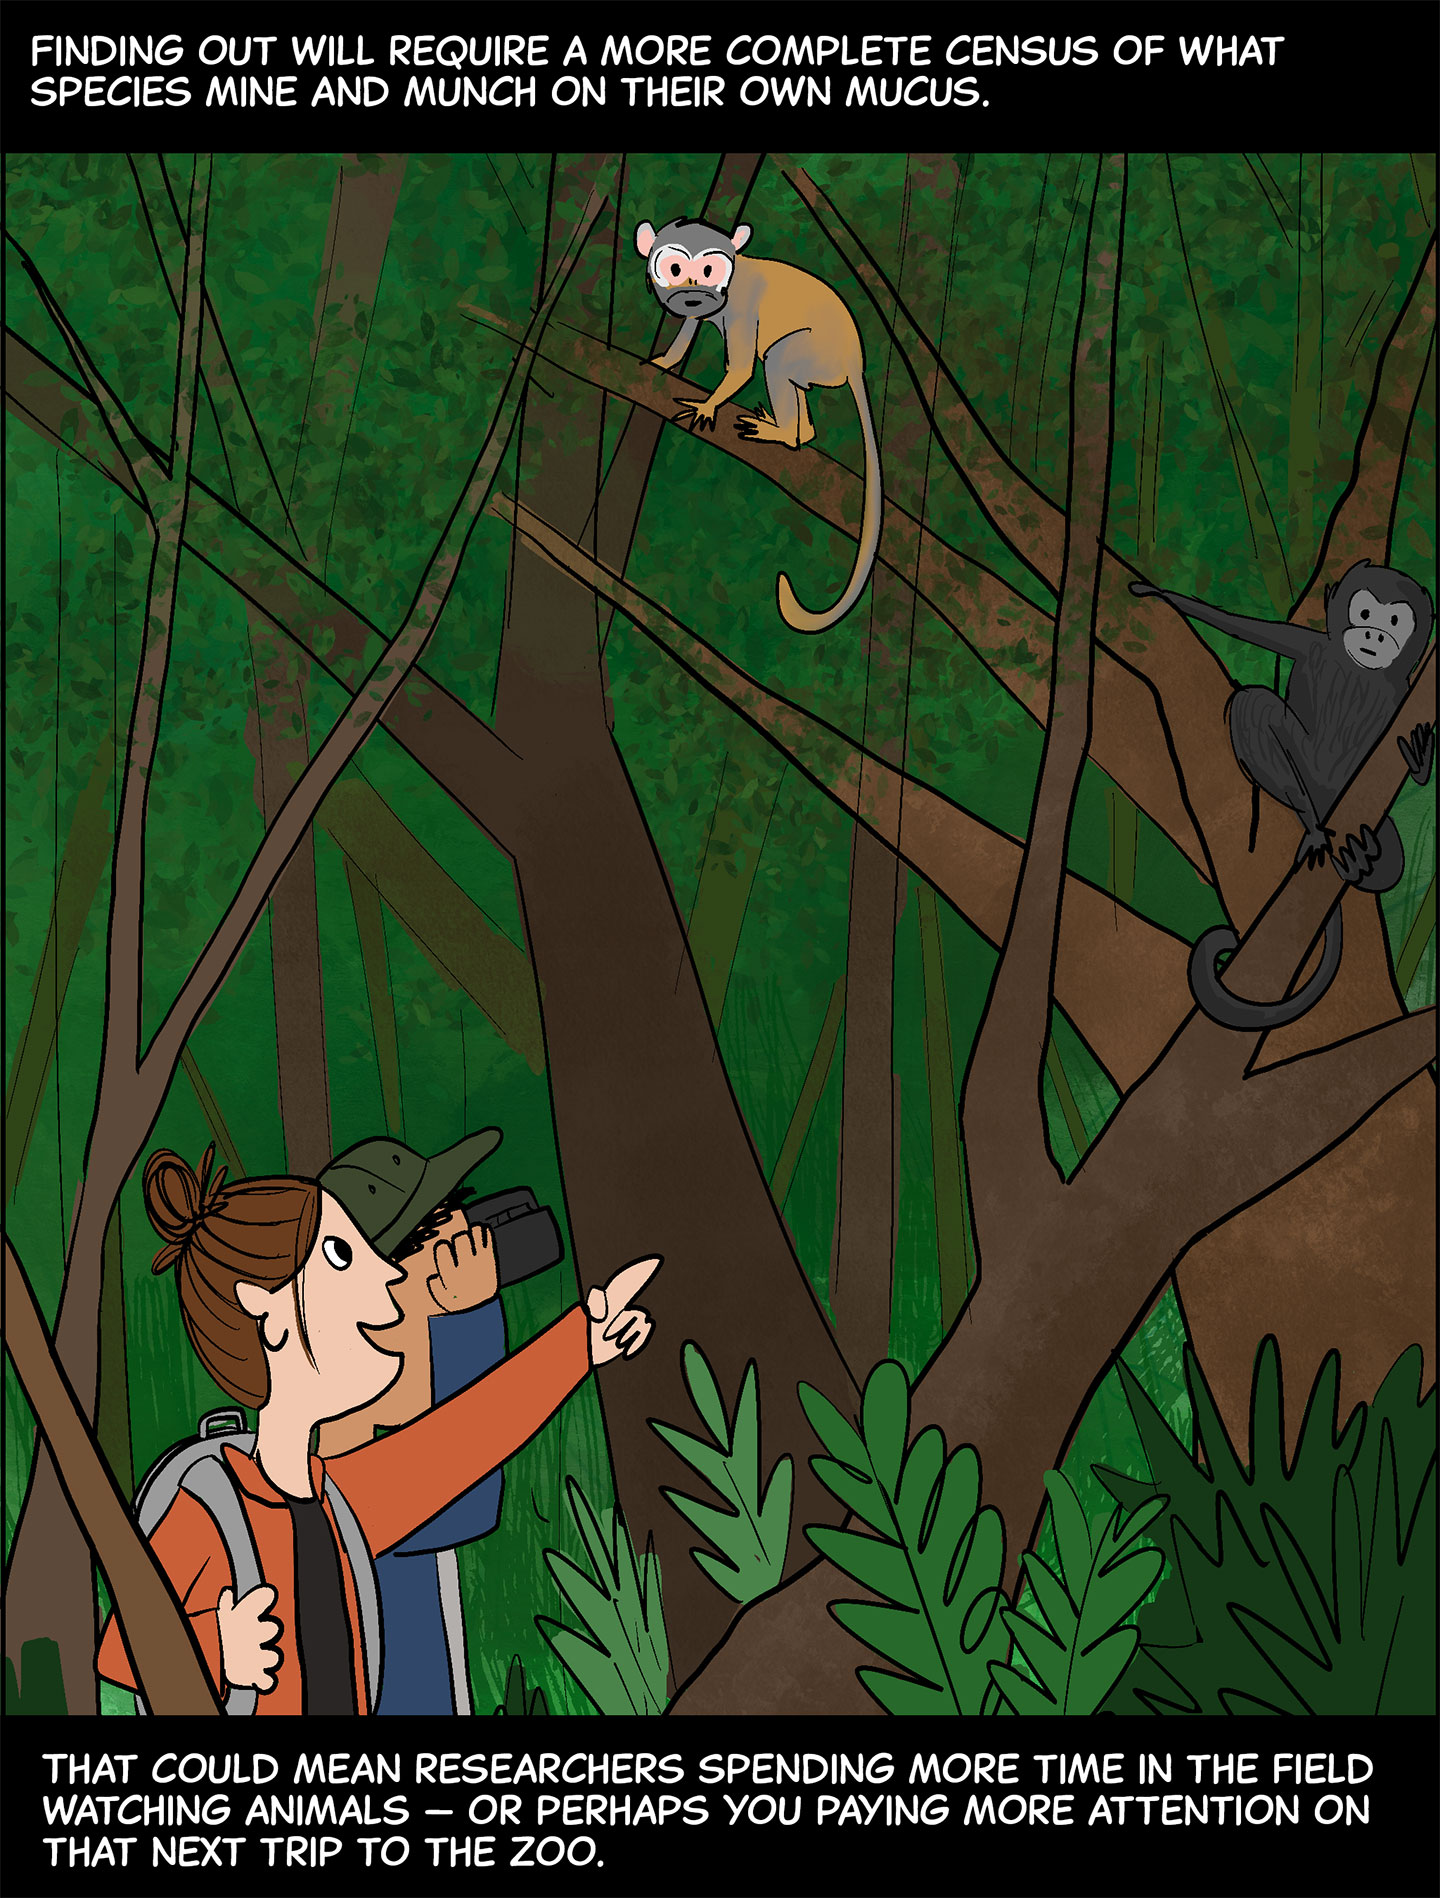 Panel 8. Text (above image): Finding out will require a more complete census of what species mine and munch on their own mucus. Image: A man and a woman stand in a forest. The man is looking at a monkey in a tree with binoculars, while the woman points at it and smiles. Another monkey sits higher up in the tree. Text (below image): That could mean researchers spending more time in the field watching animals—or perhaps you paying more attention on that next trip to the zoo. 